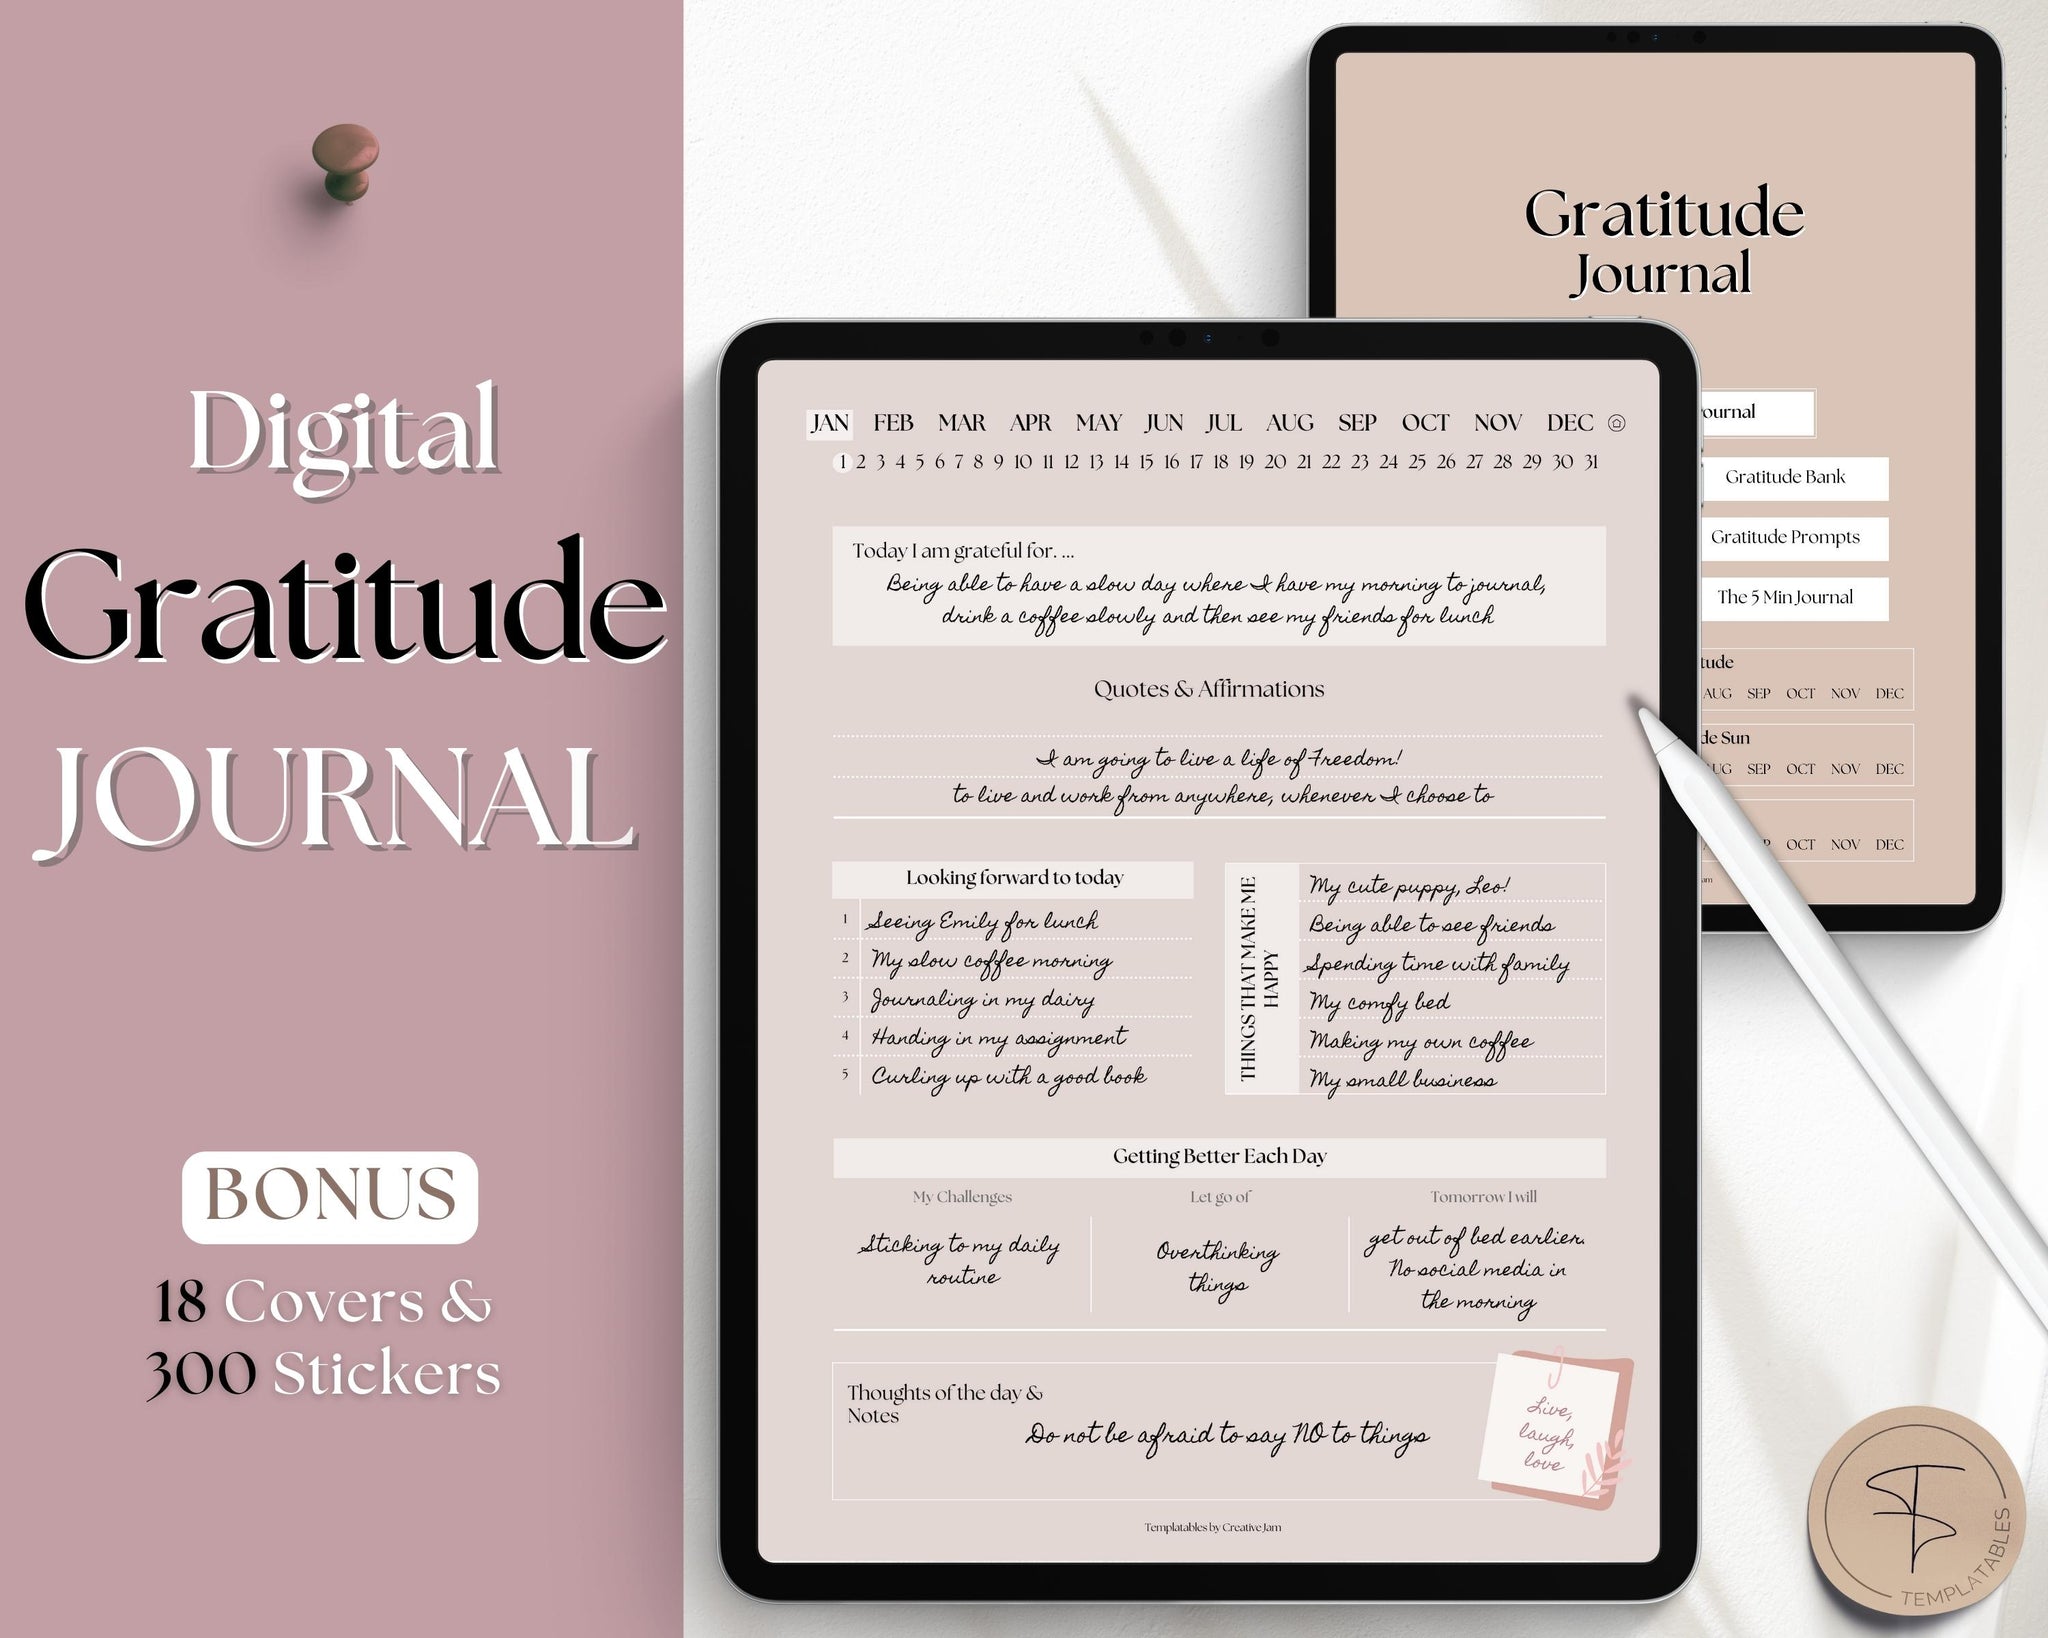 Best gratitude journals of 2023 for mindfulness and positivity